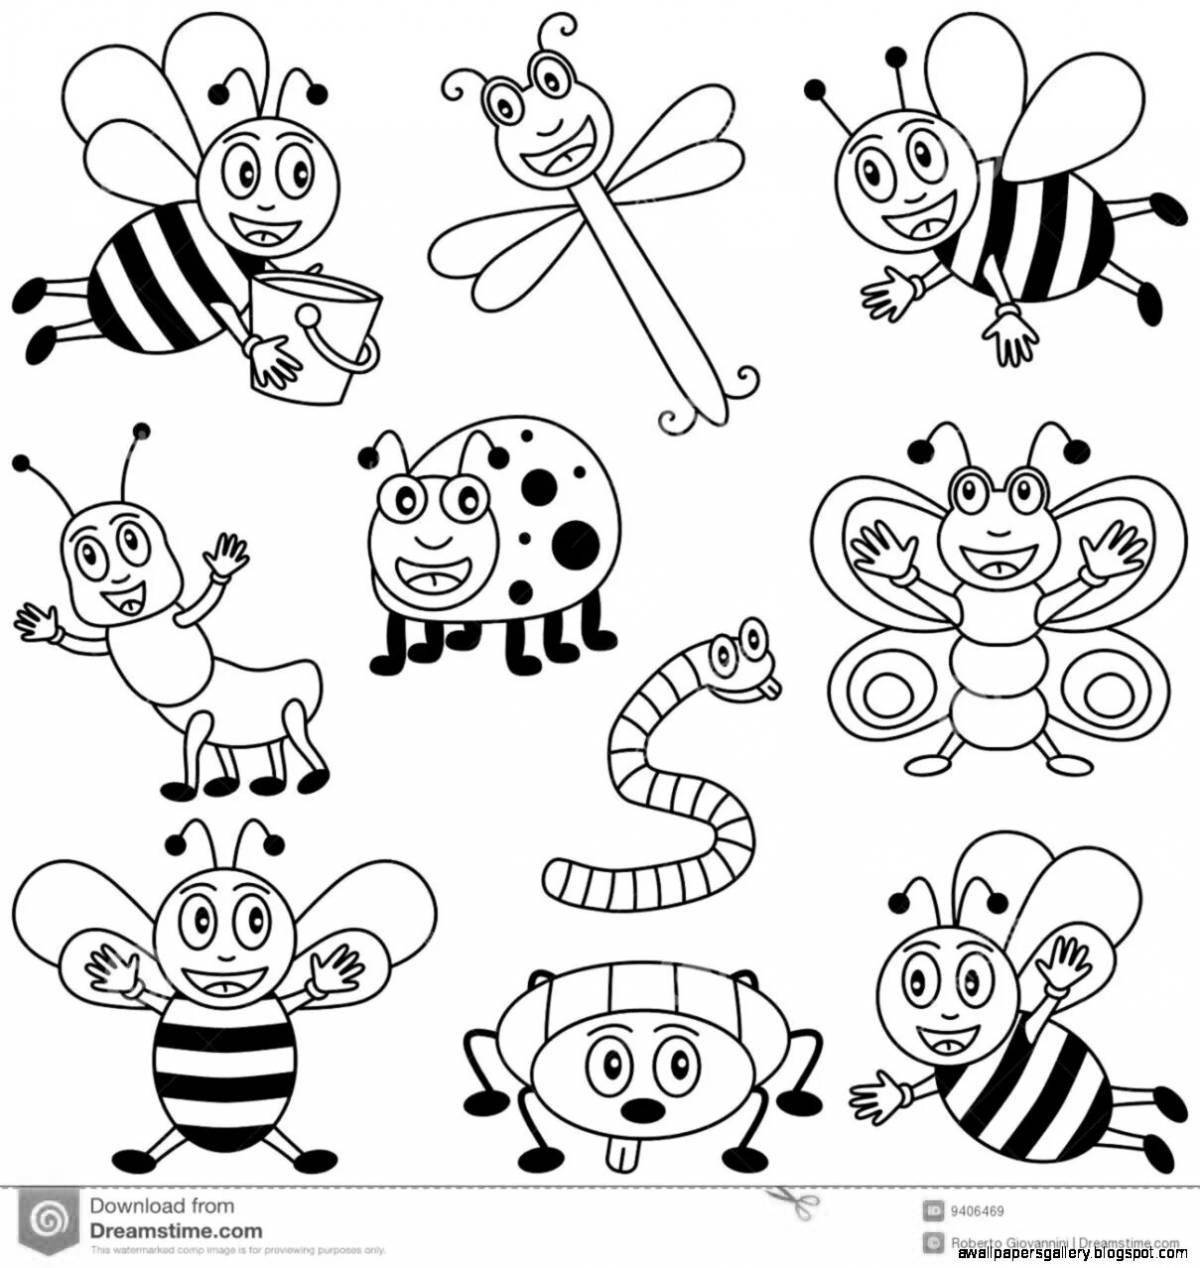 Elegant insect class coloring